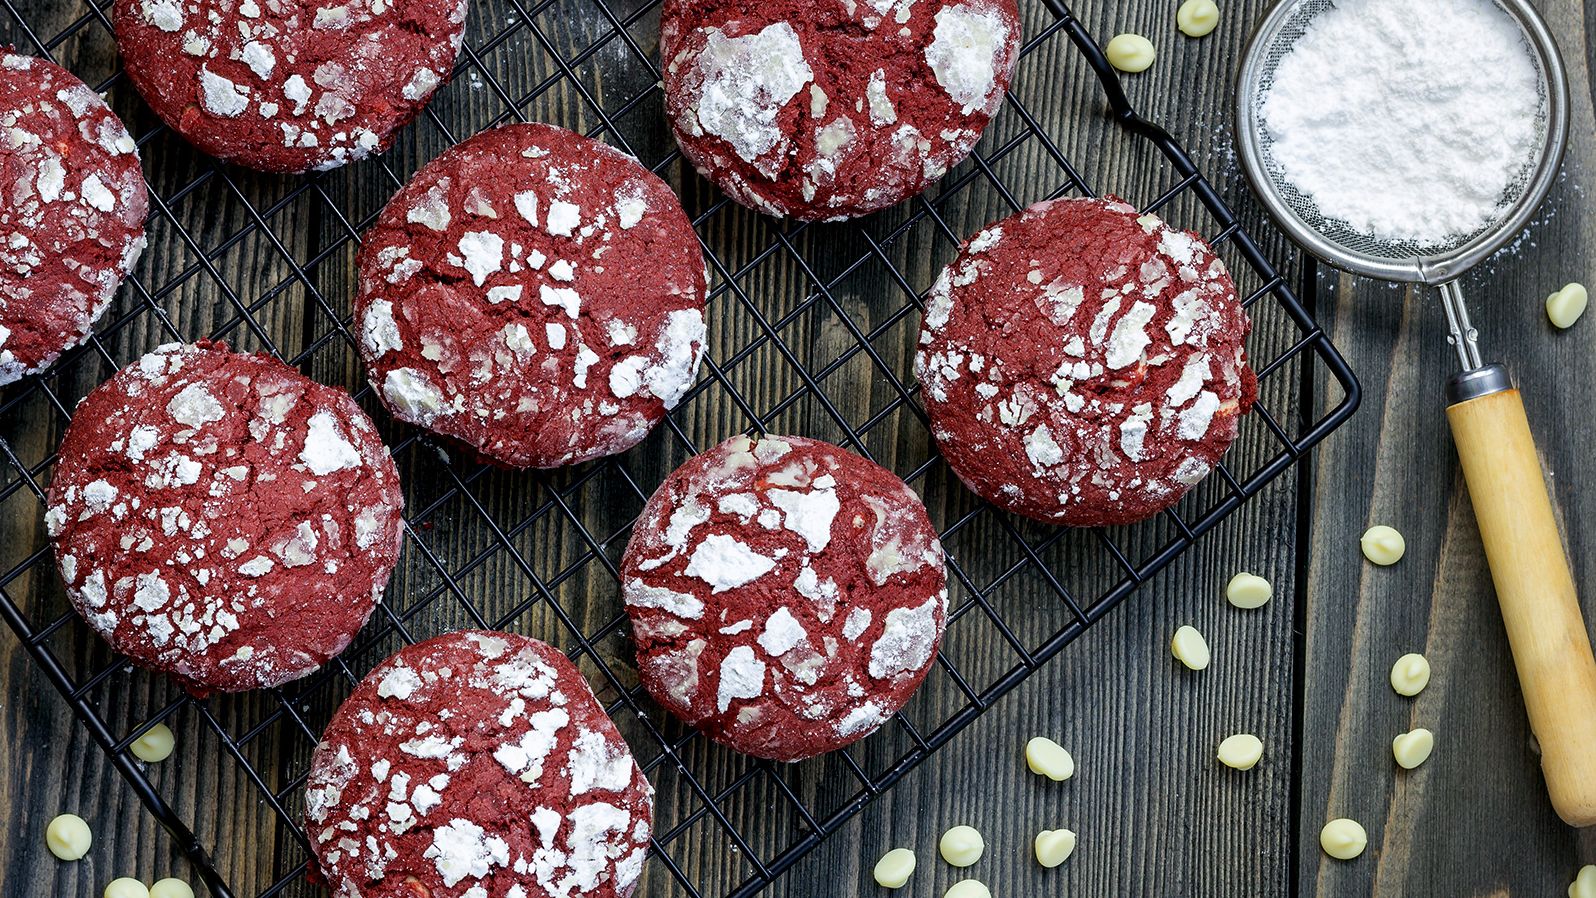 More complex recipes such as red velvet crackle cookies require the dough to be chilled before rolling.